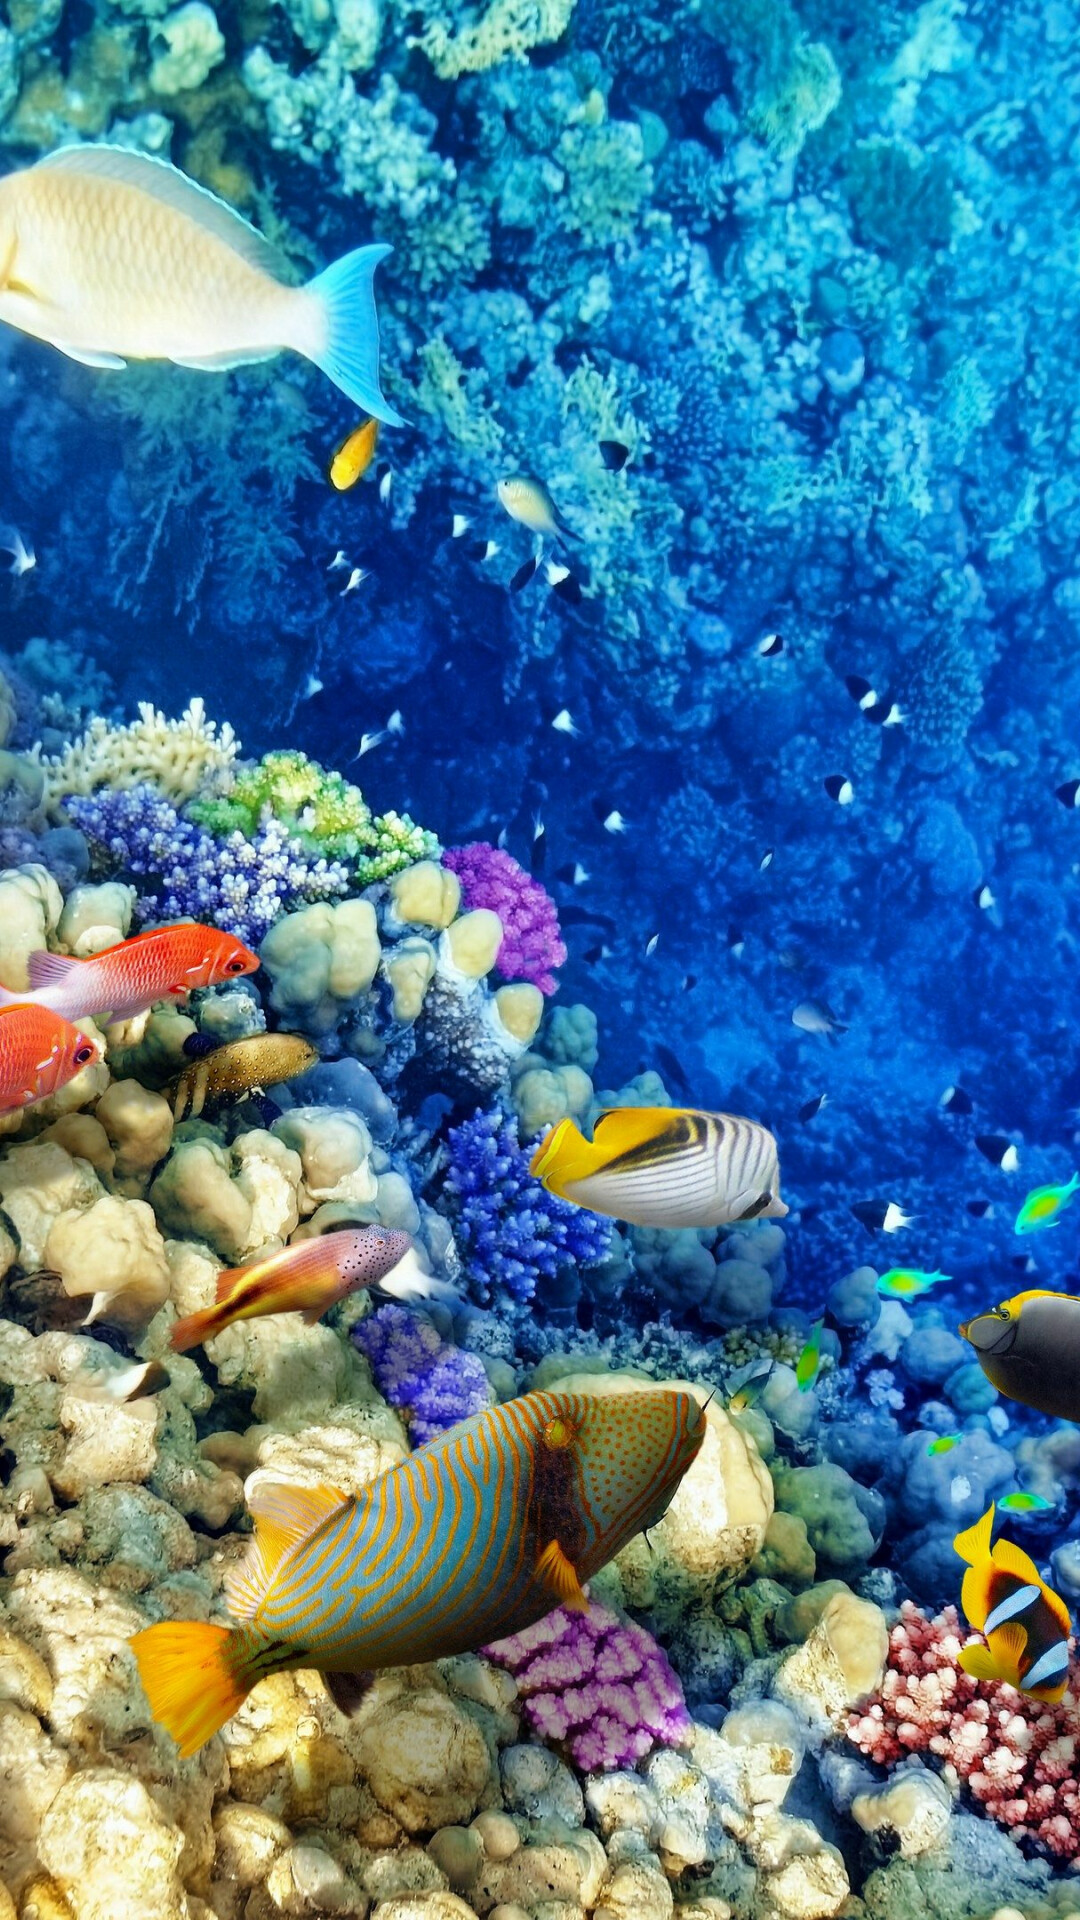 Coral Reef: Provides important habitats for seabird species, some endangered. 1080x1920 Full HD Background.